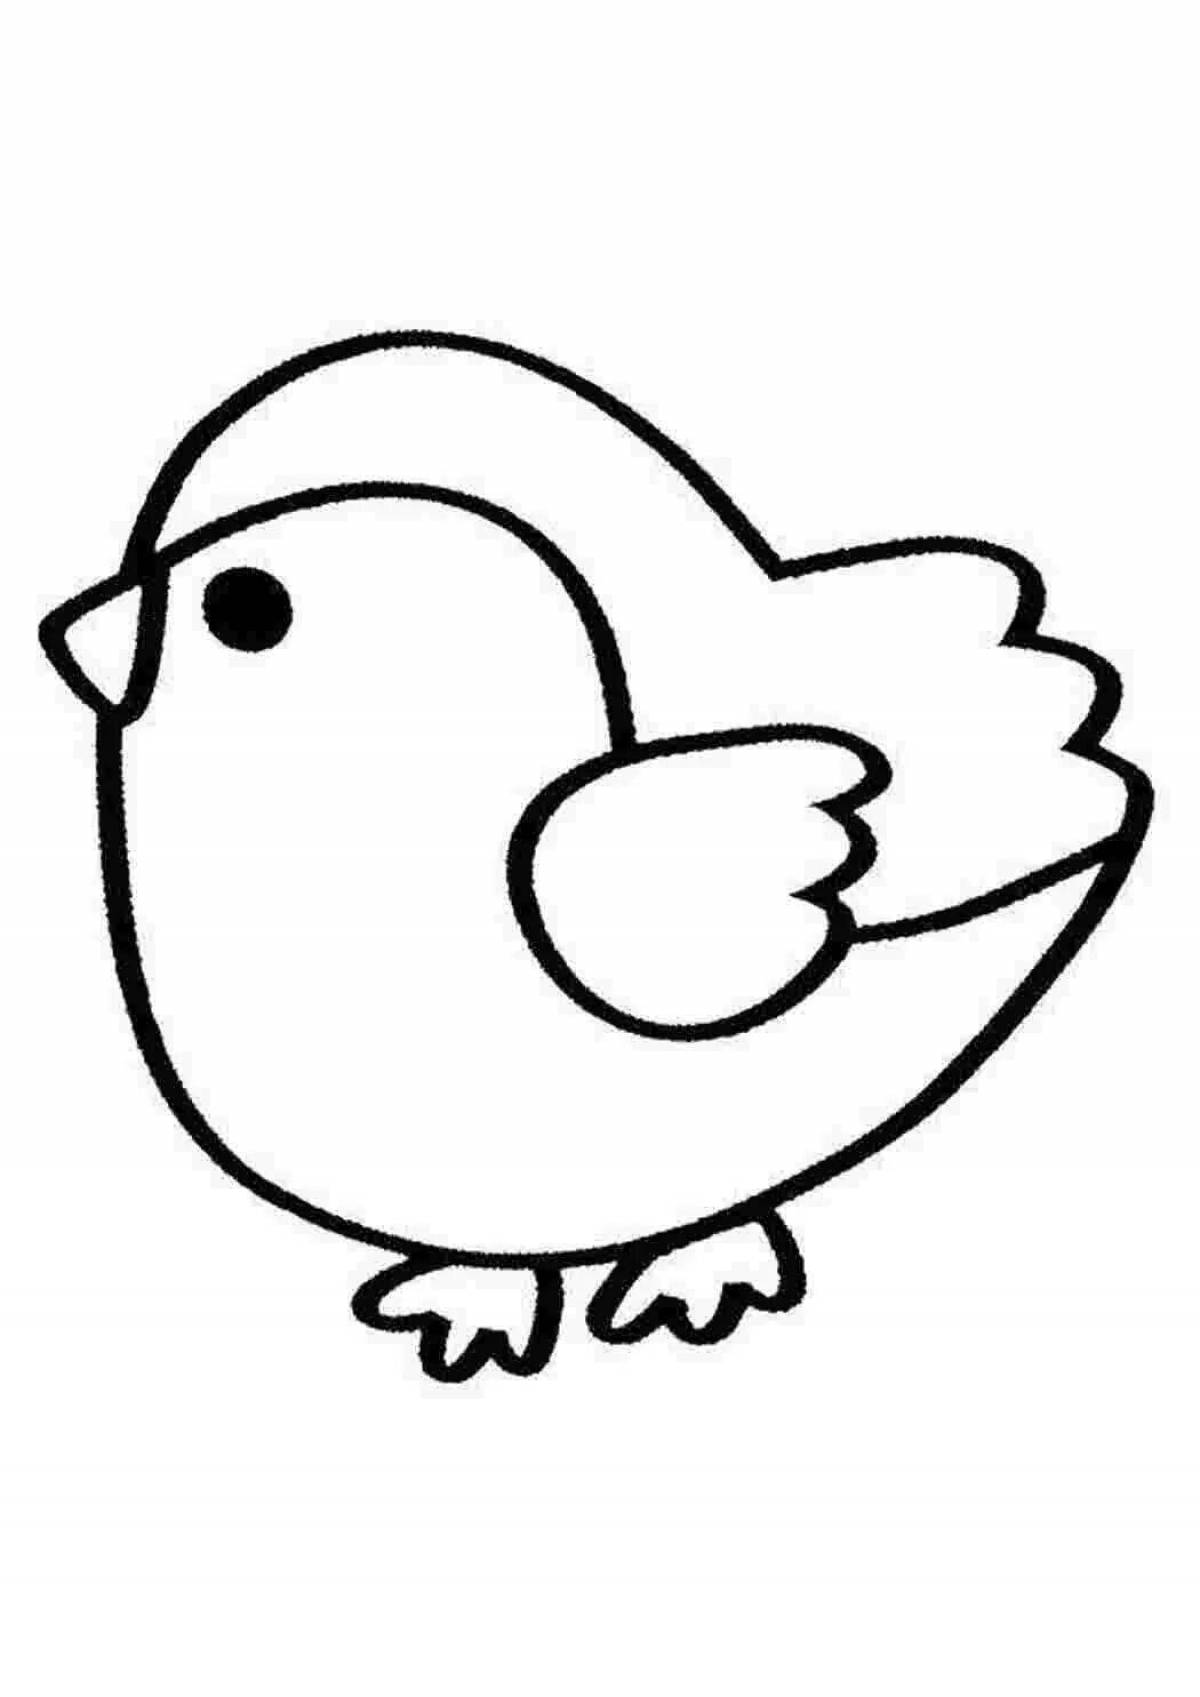 Glorious sparrow coloring page